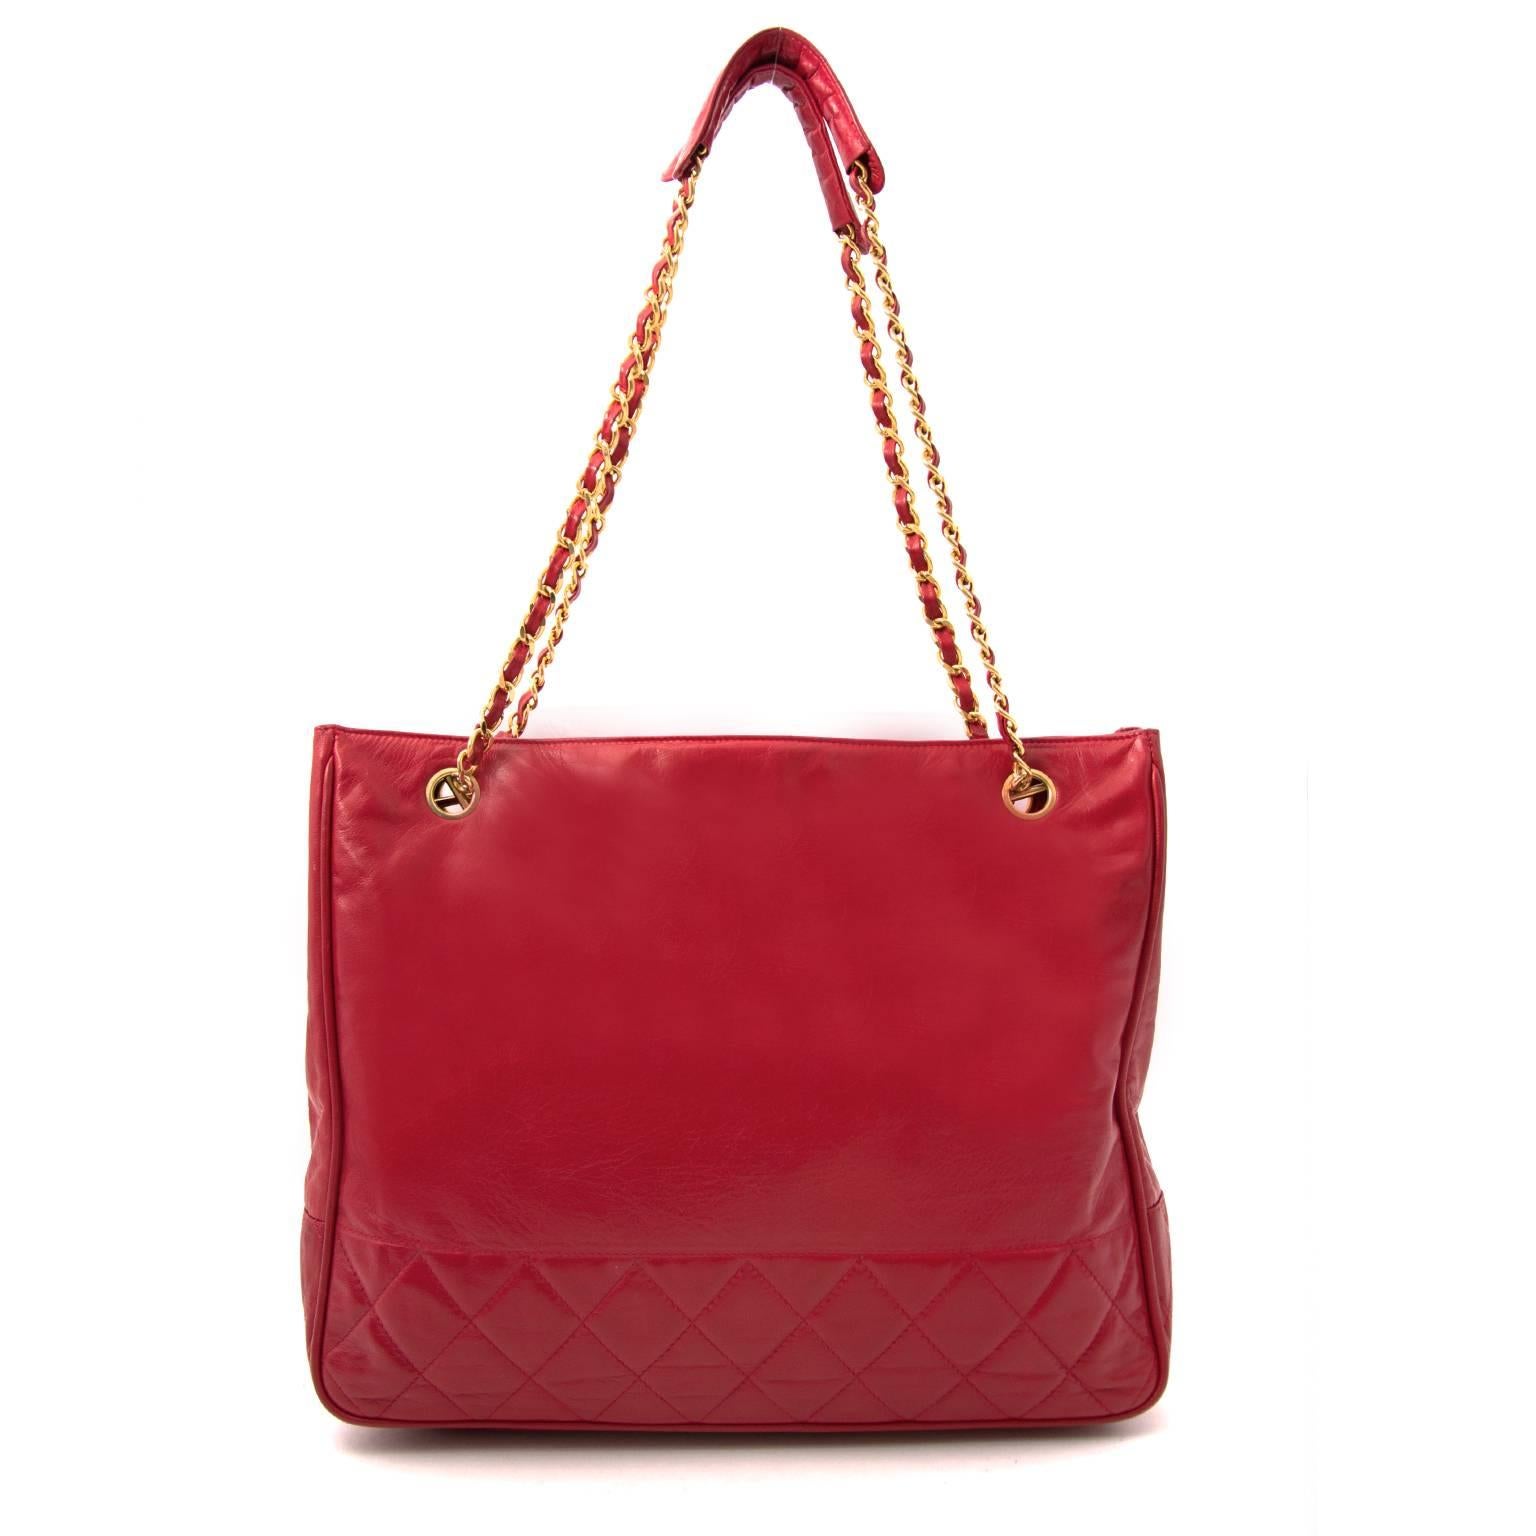 Chanel Red Shopping Tote
This vintage treasure is a real musthave. The beautiful red Chanel color and gold toned hardware have a luxurious vintage flair. The bag closes with two press buttons so your items are hold safe, the perfect practical day to